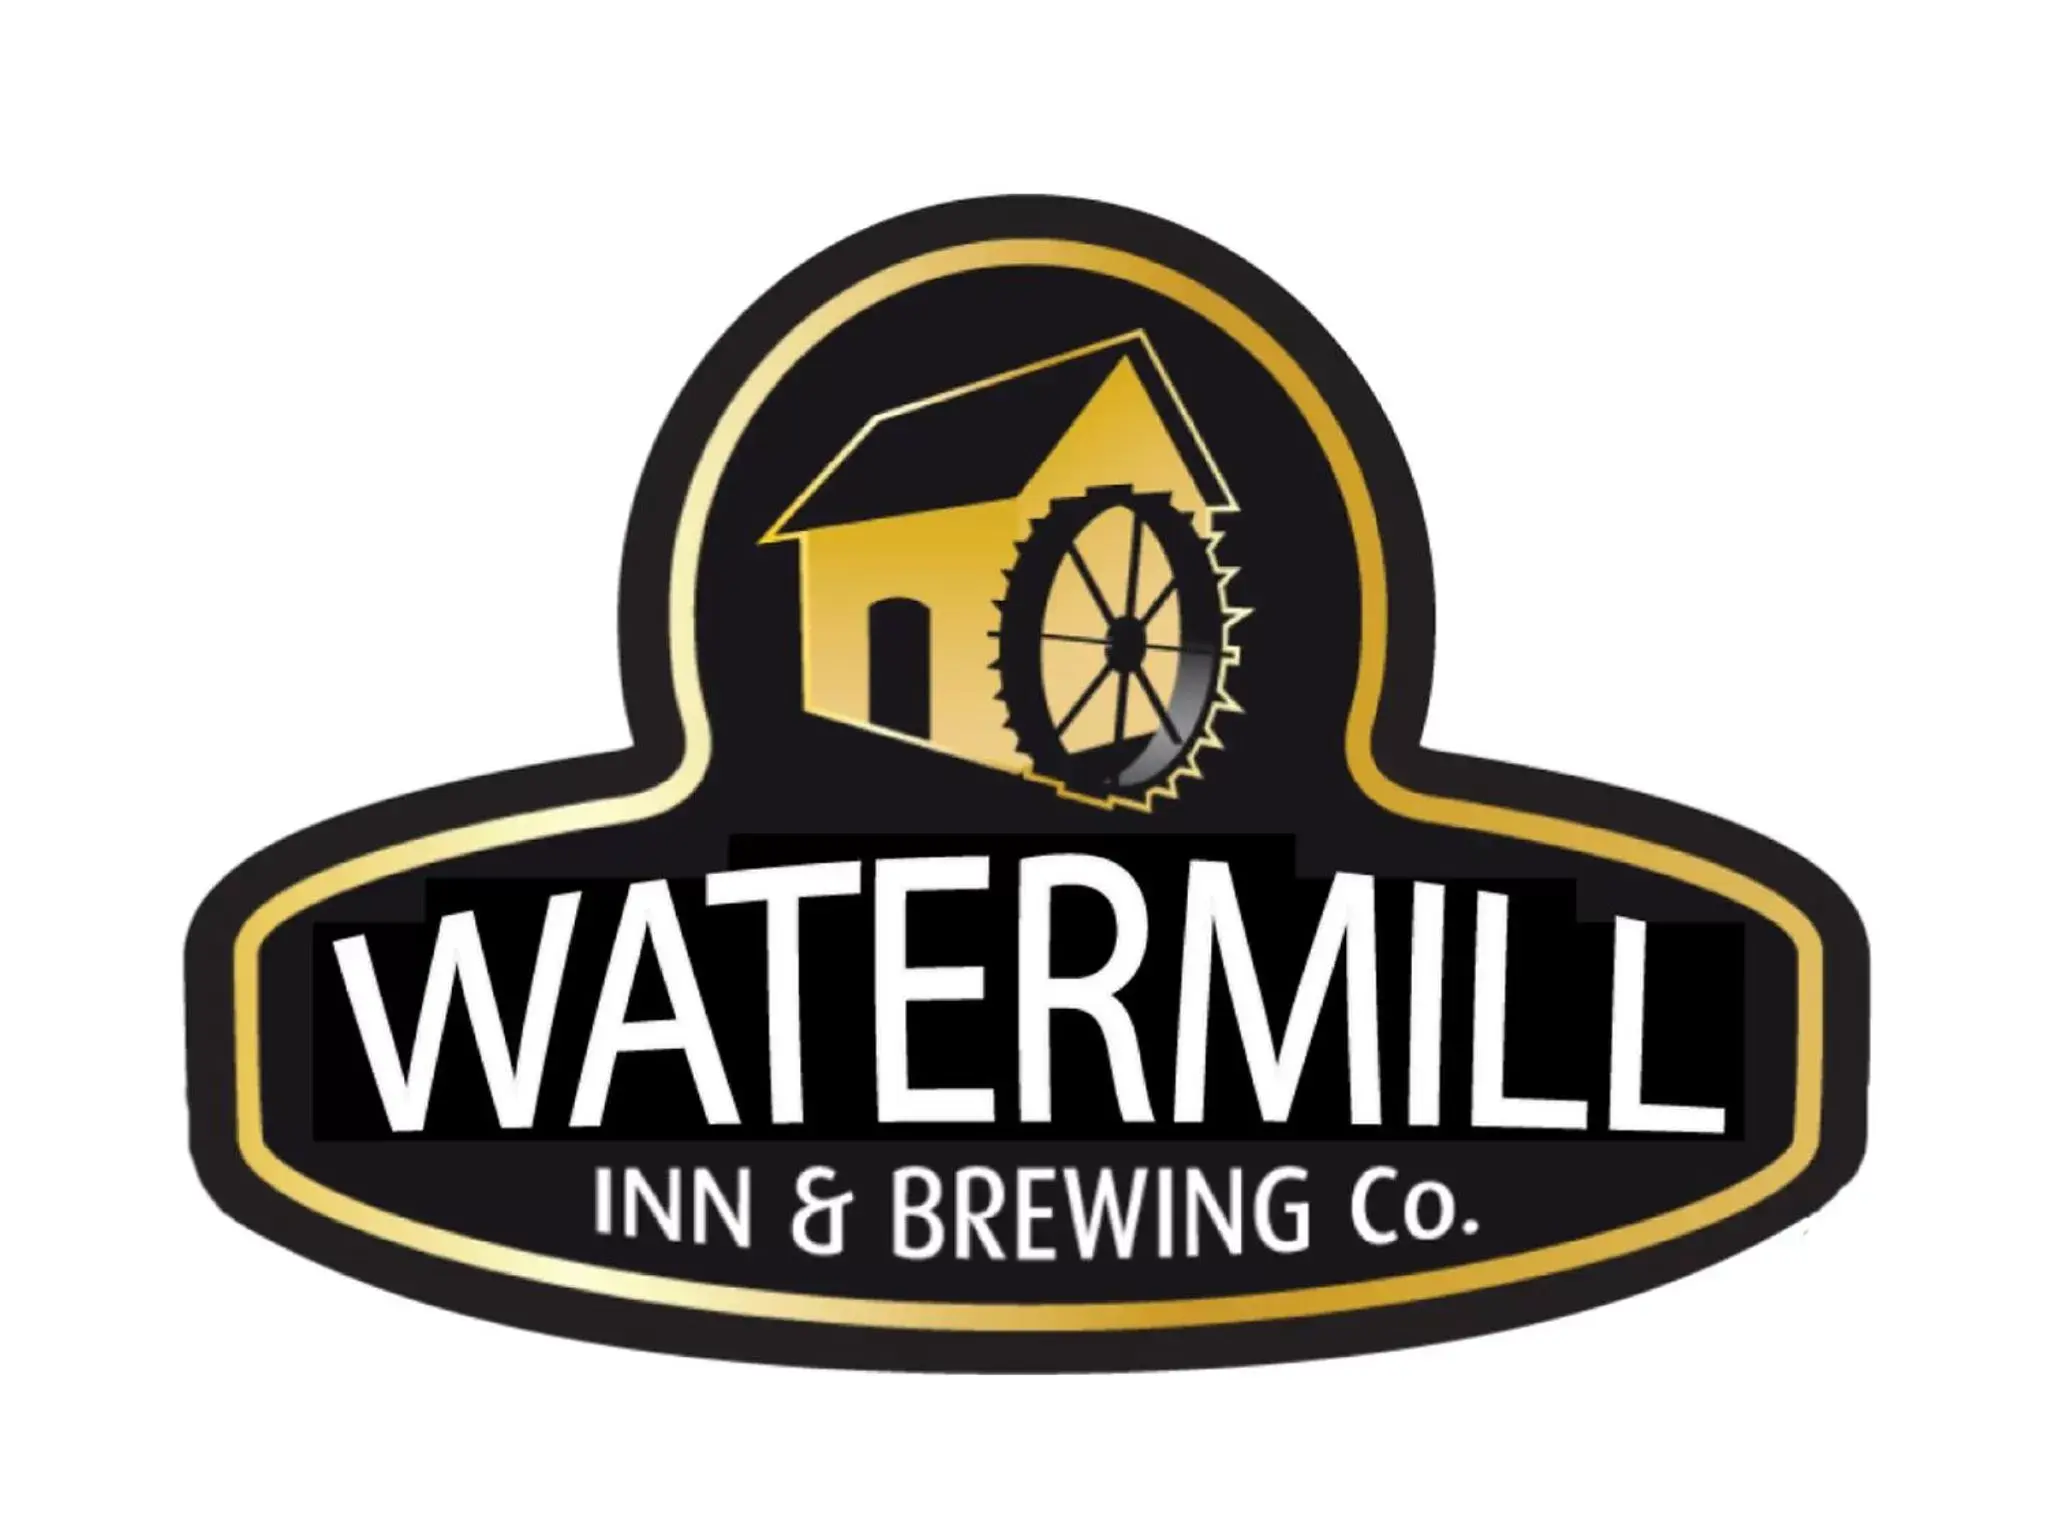 Property logo or sign in The Watermill Inn & Brewery